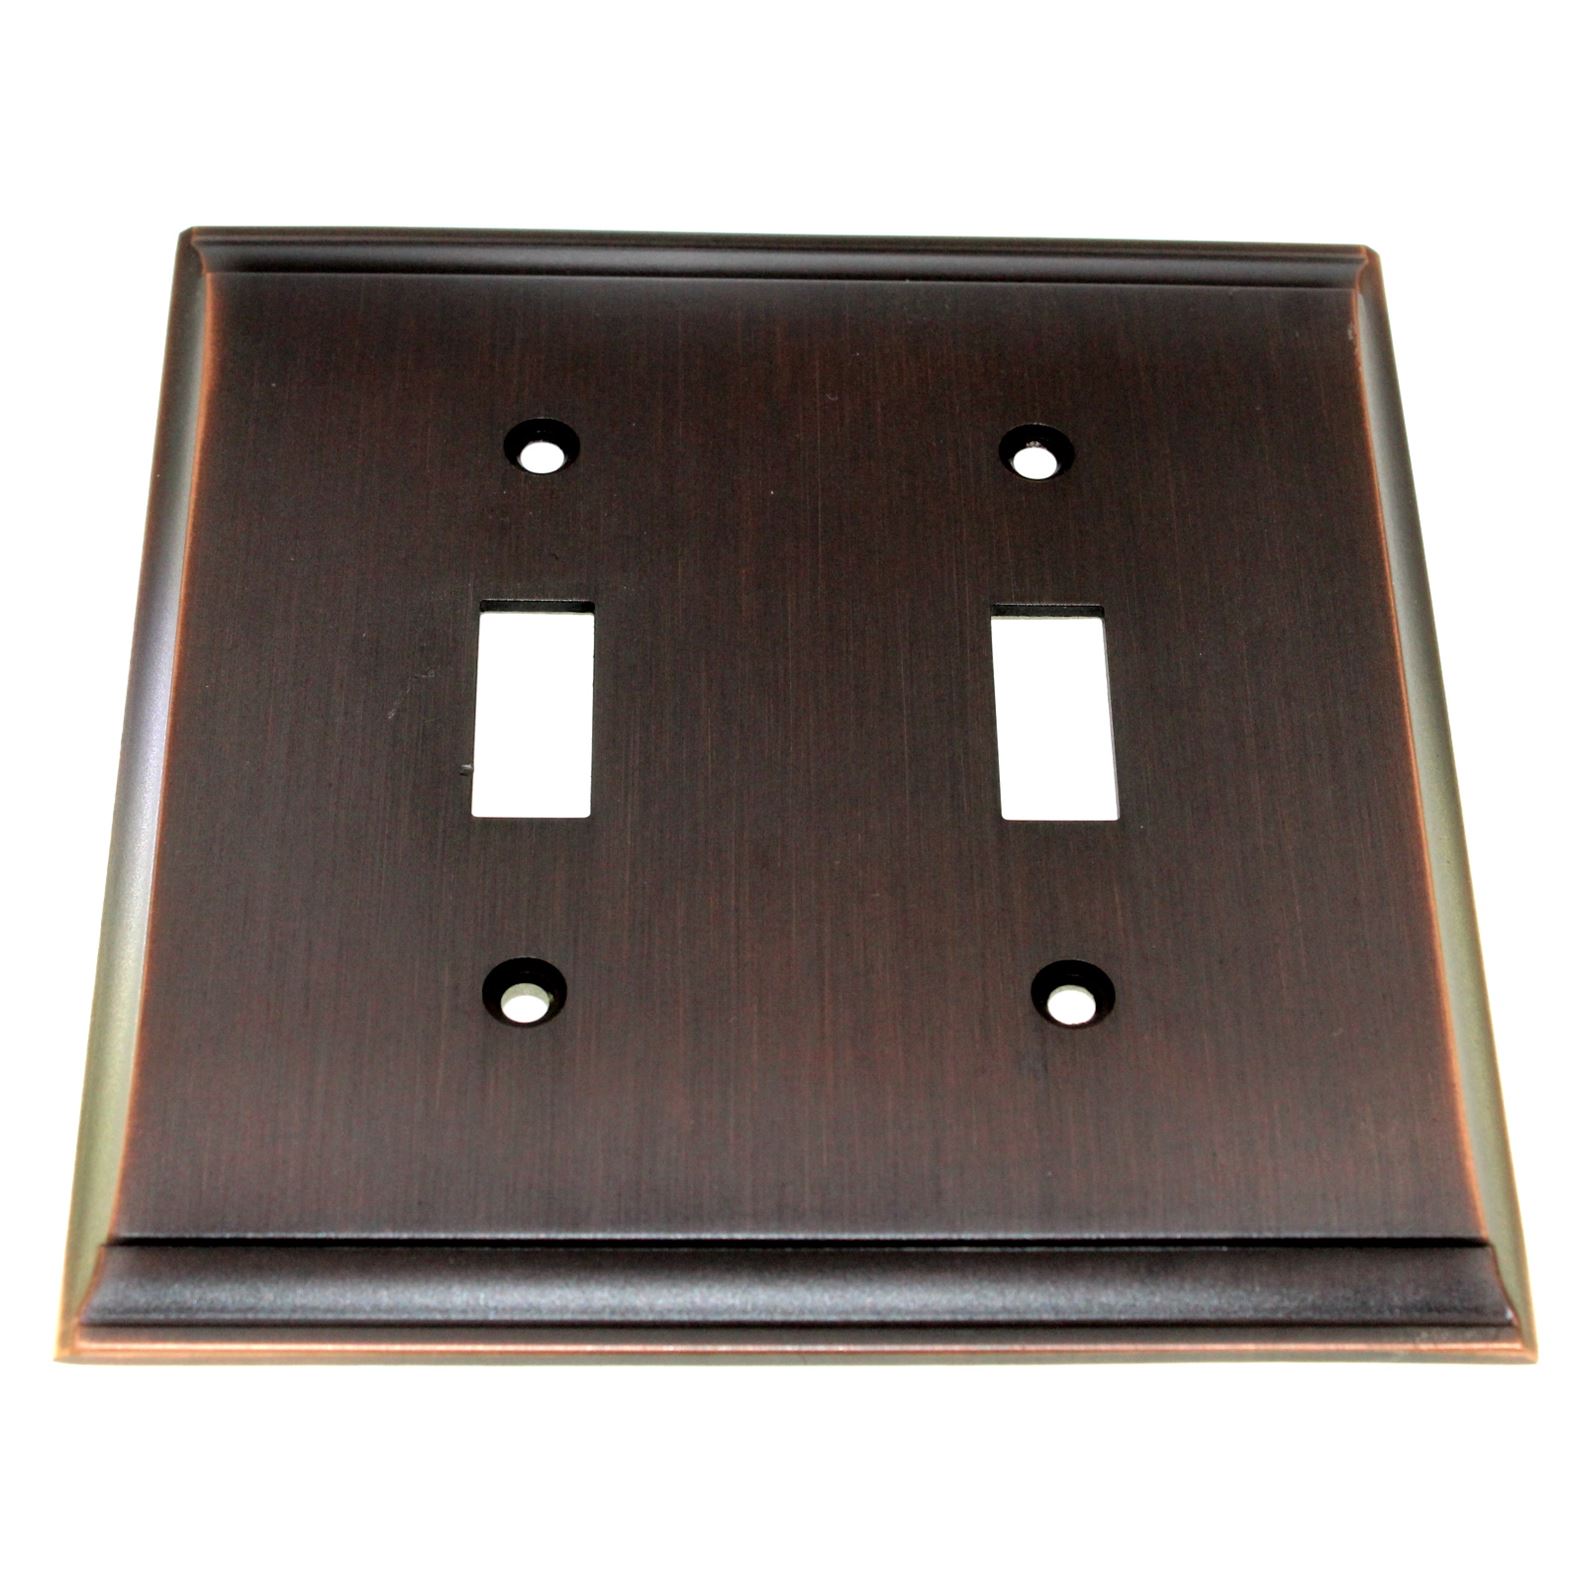 Amerock Candler Oil-Rubbed Bronze 2 Toggle Light Switch Wall Plate BP36501ORB